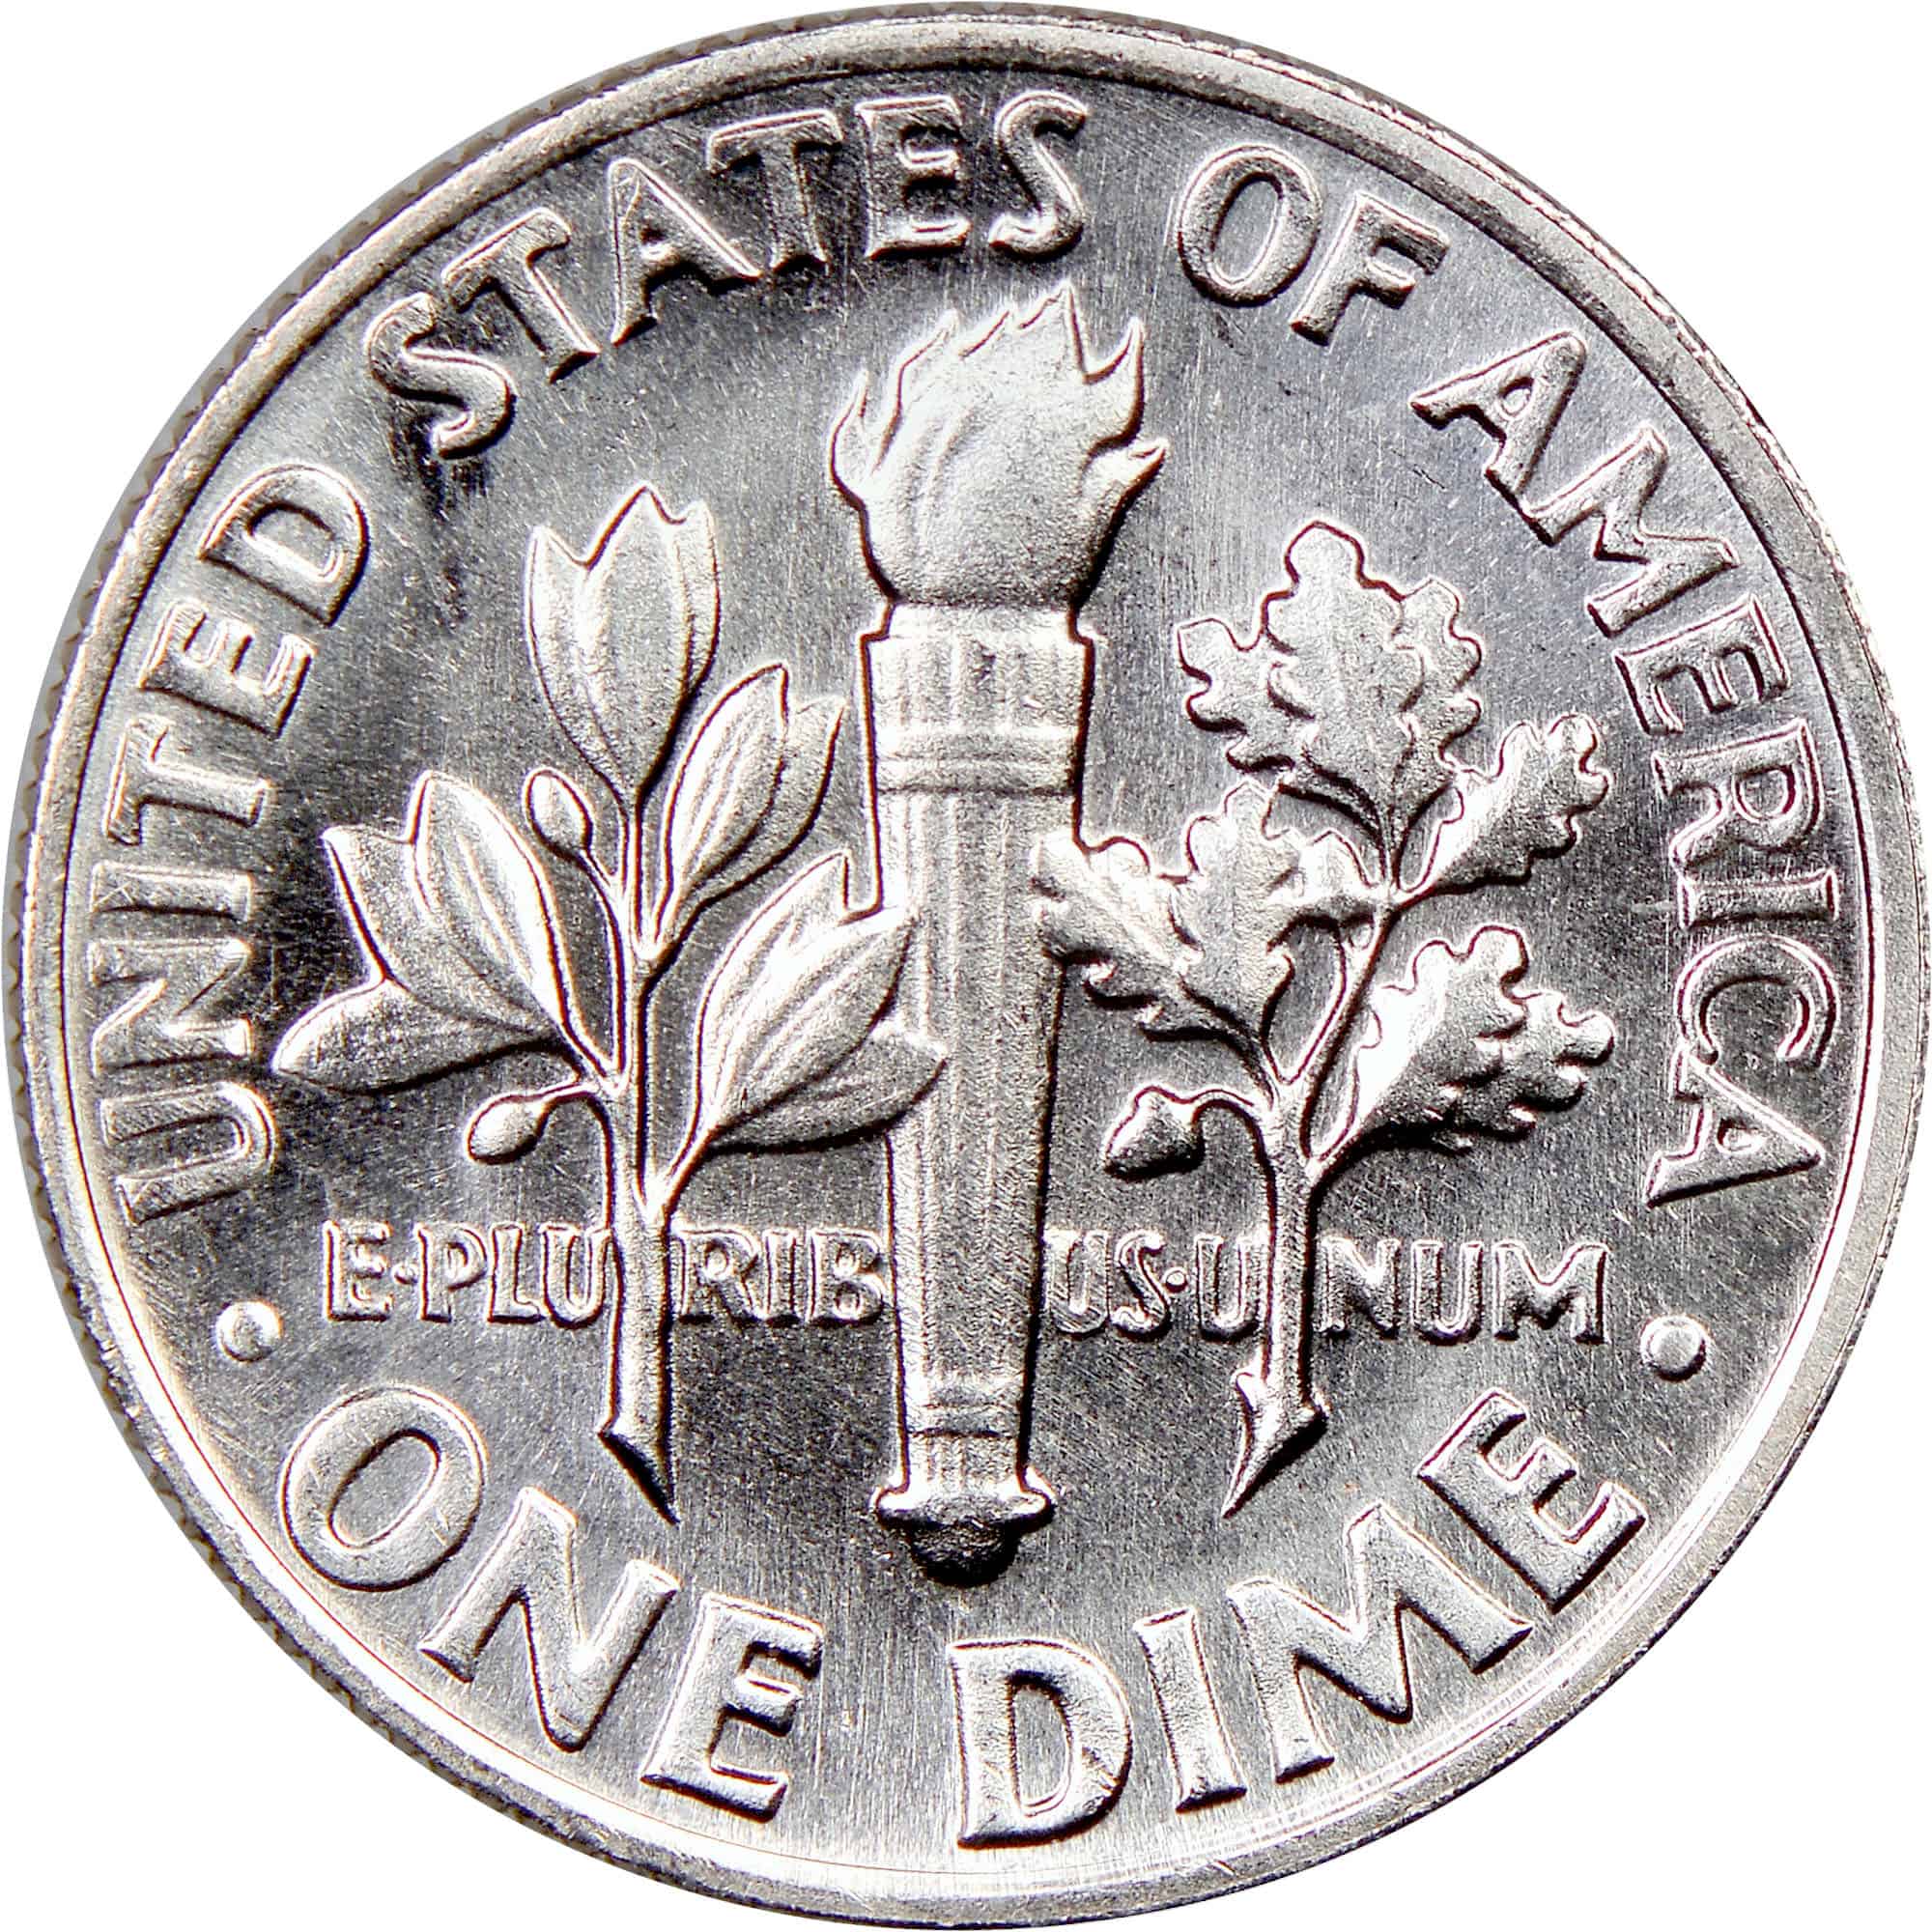 The reverse of the 1969 Roosevelt dime